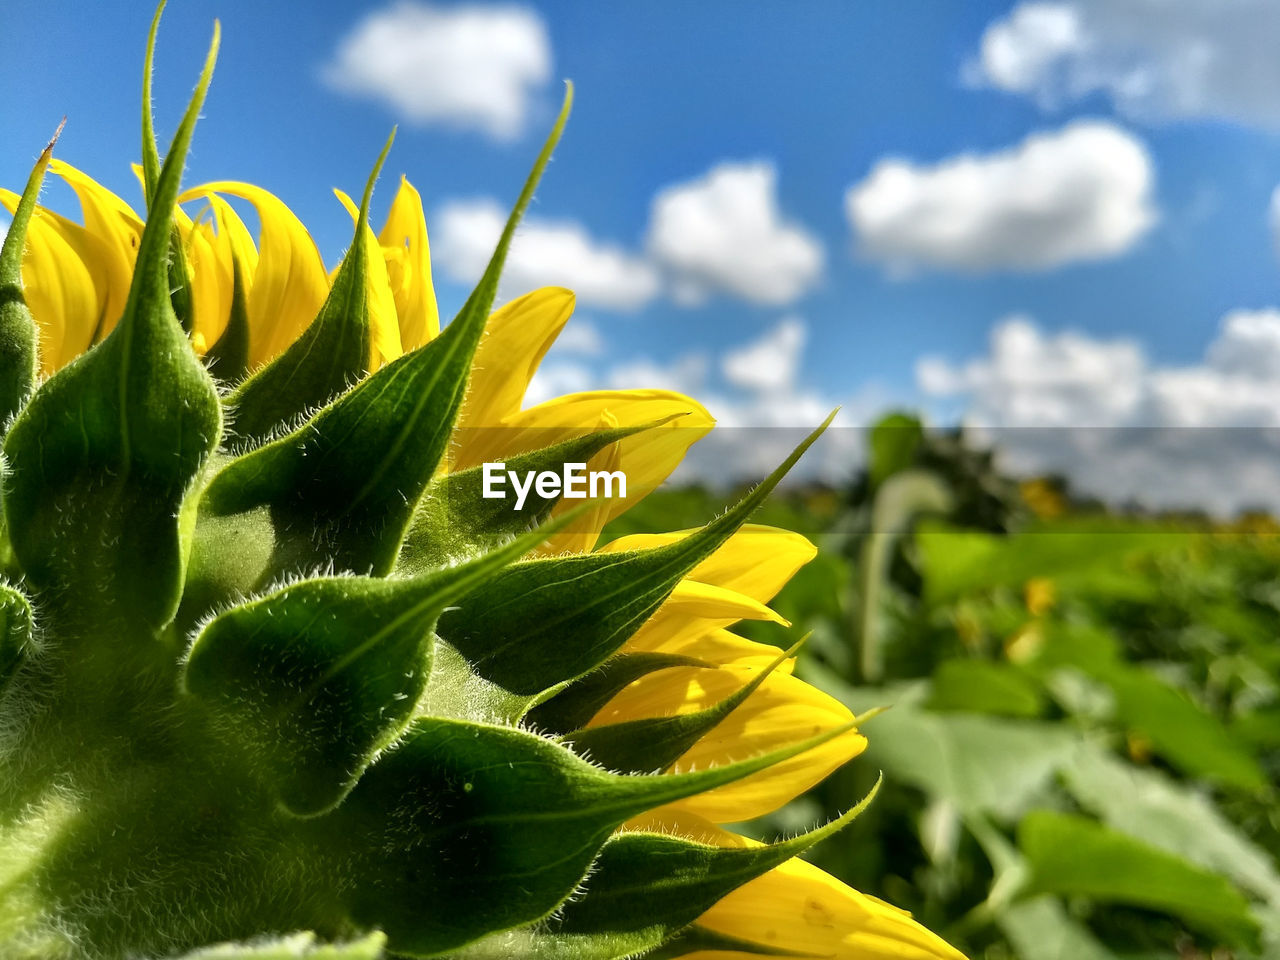 plant, green, nature, flower, sky, yellow, growth, sunflower, beauty in nature, cloud, freshness, leaf, flowering plant, plant part, field, no people, close-up, macro photography, grass, sunlight, environment, wildflower, landscape, vibrant color, outdoors, land, flower head, food, day, springtime, summer, agriculture, food and drink, meadow, blue, rural scene, focus on foreground, crop, inflorescence, fragility